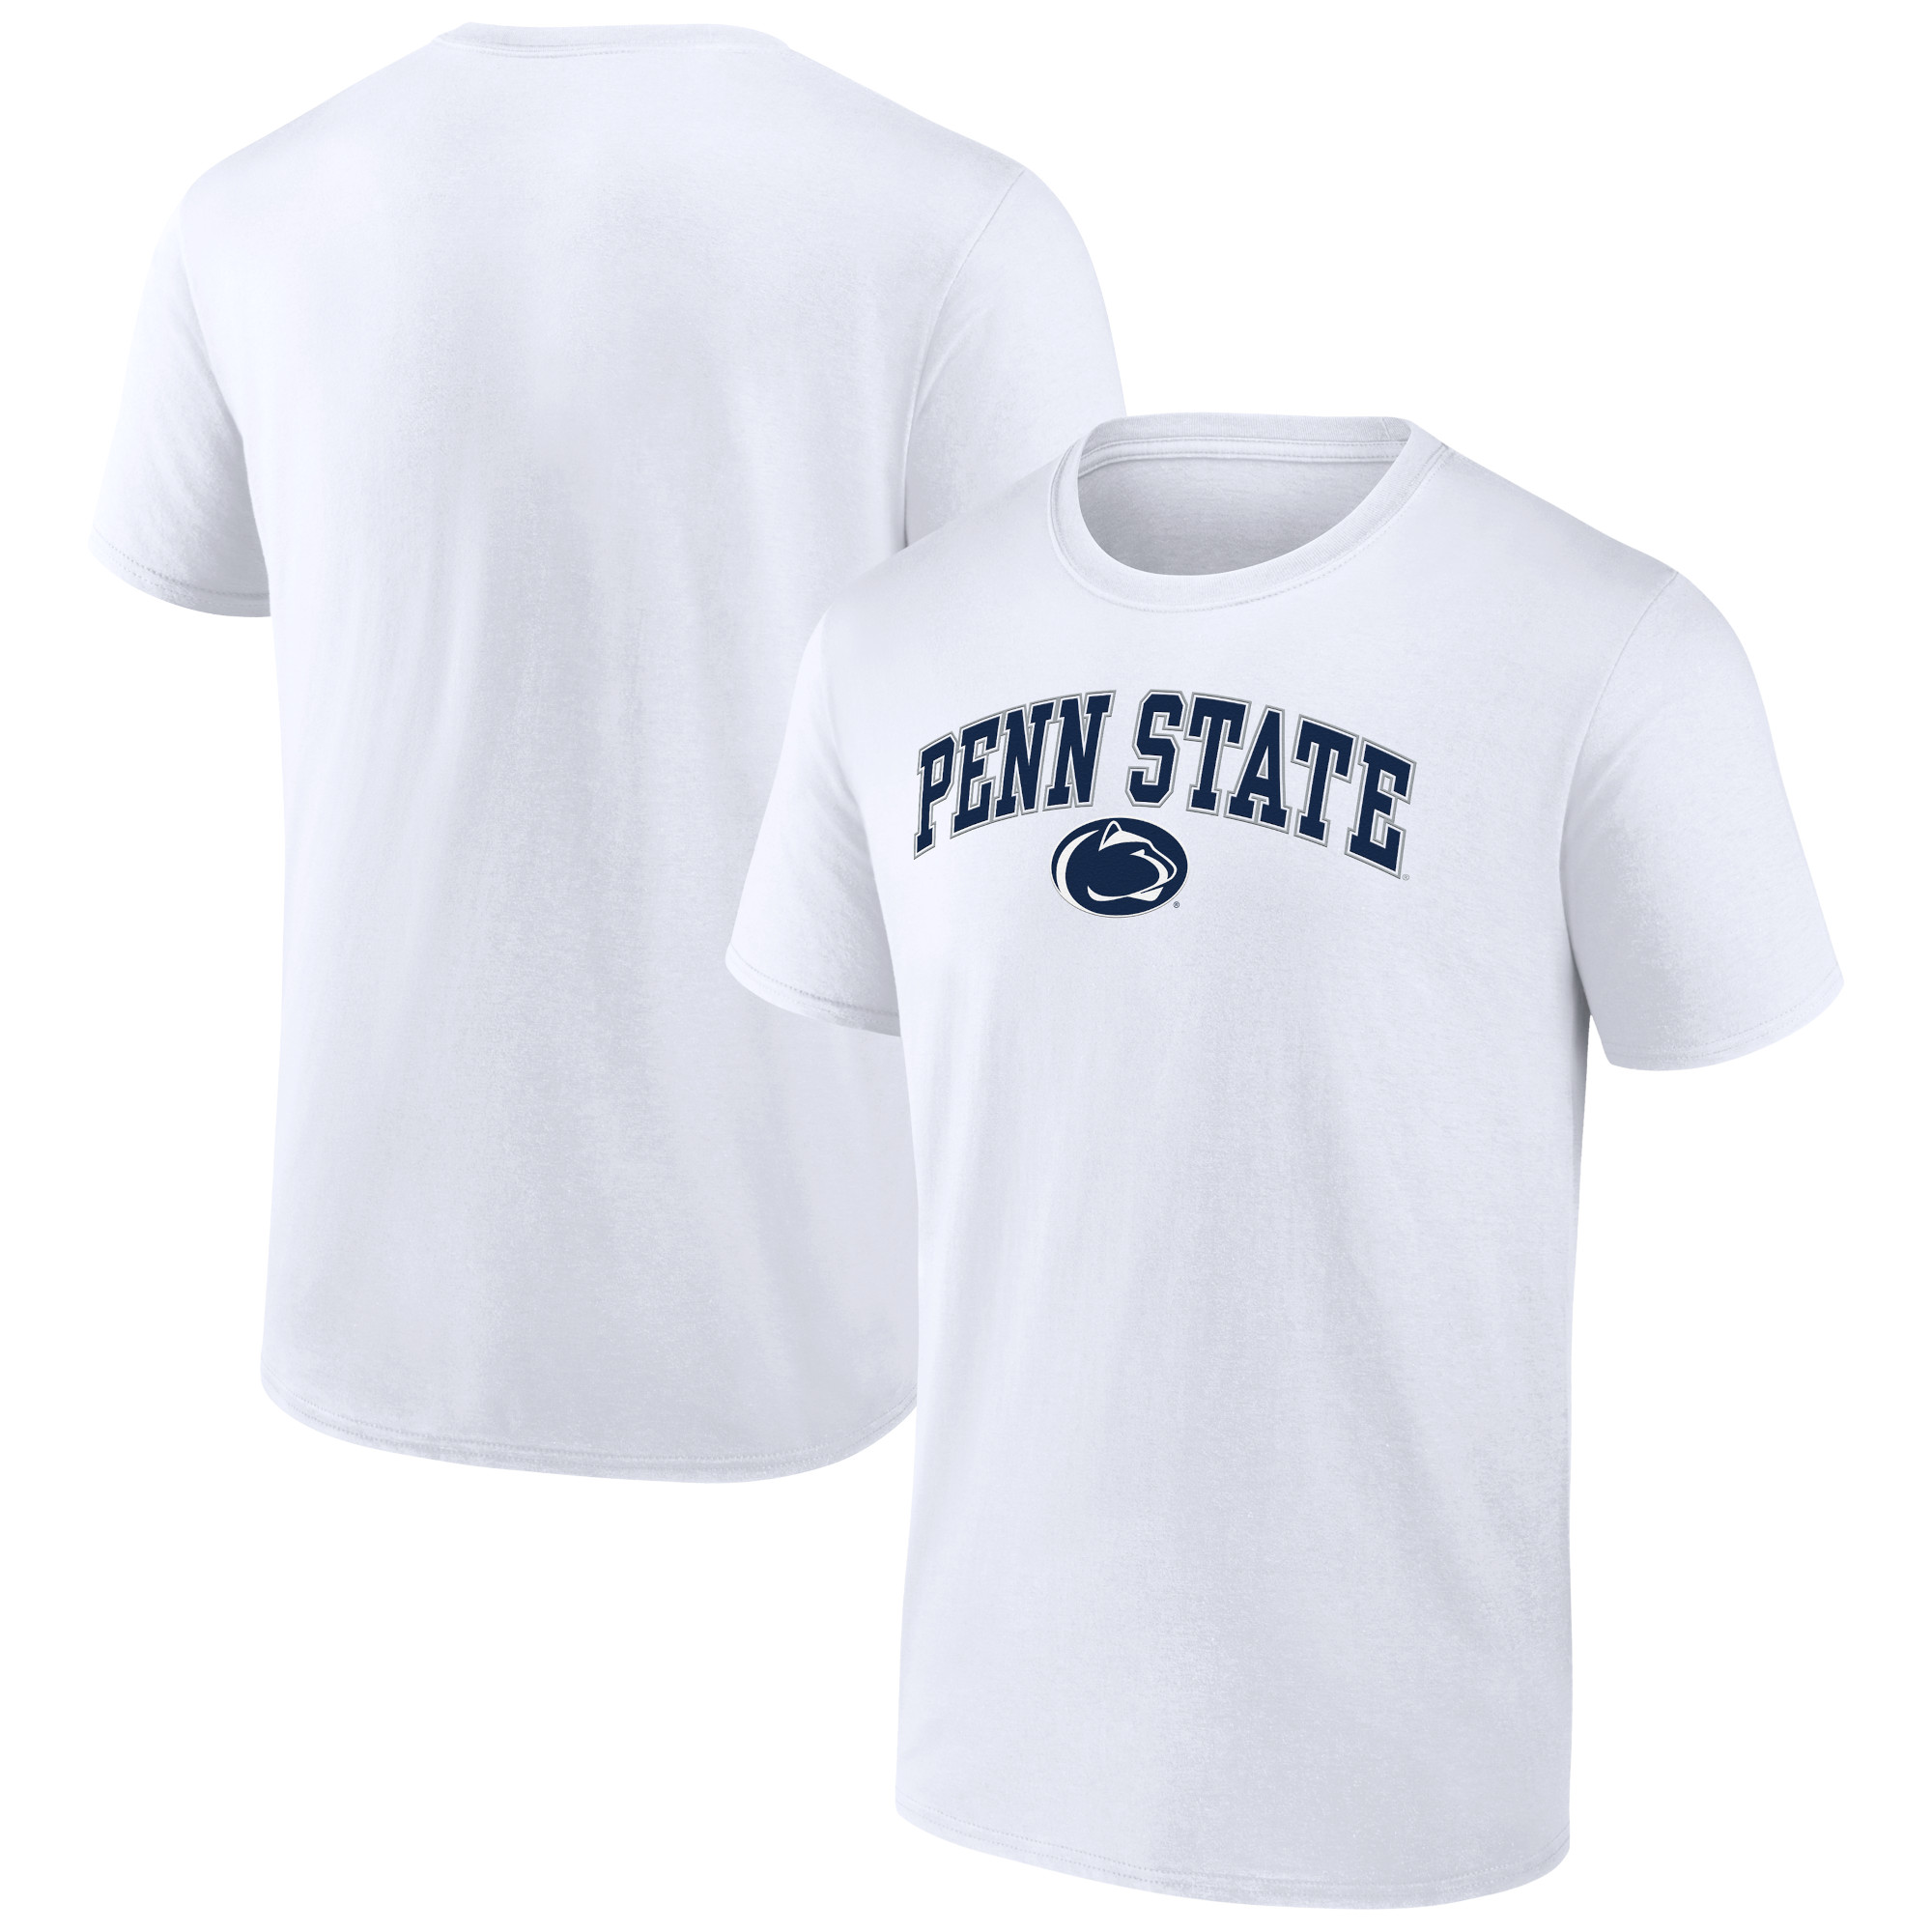 Men's Fanatics Branded White Penn State Nittany Lions Campus T-Shirt - image 1 of 3